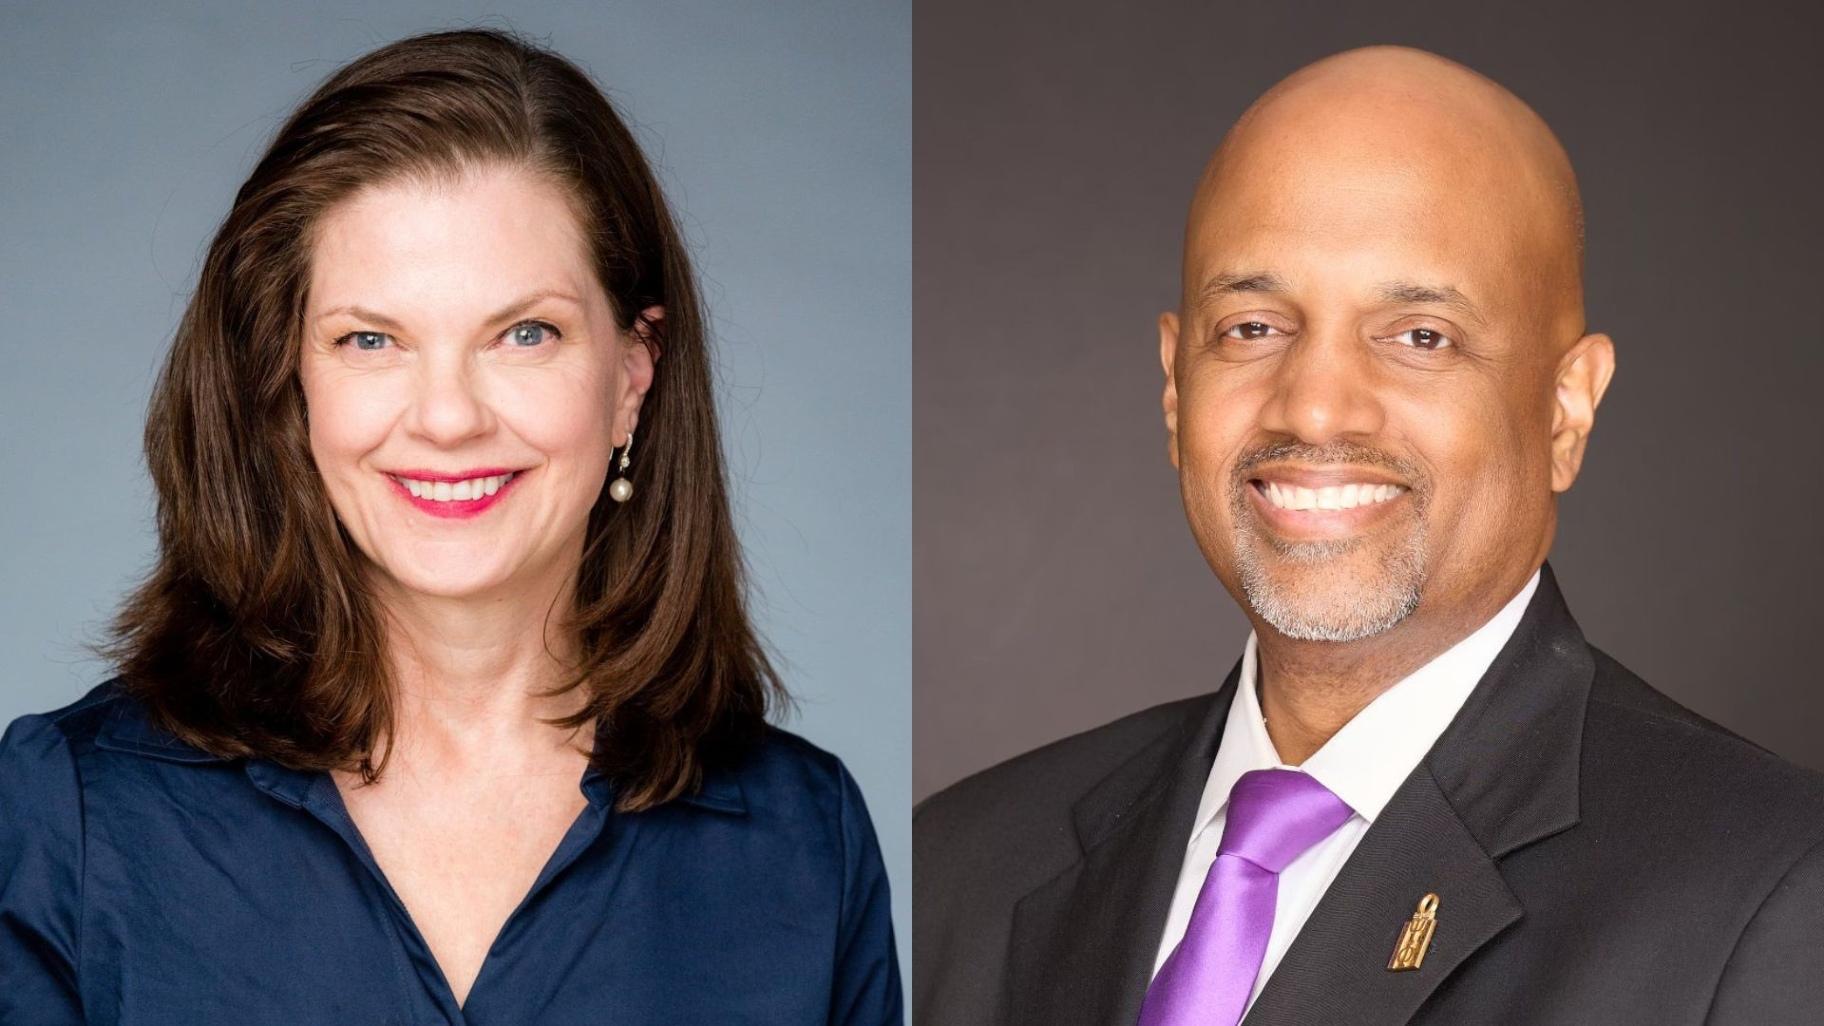 Eileen O’Neill Burke and Clayton Harris III are running for the Democratic nomination in the race for Cook County state’s attorney. (Photos provided)